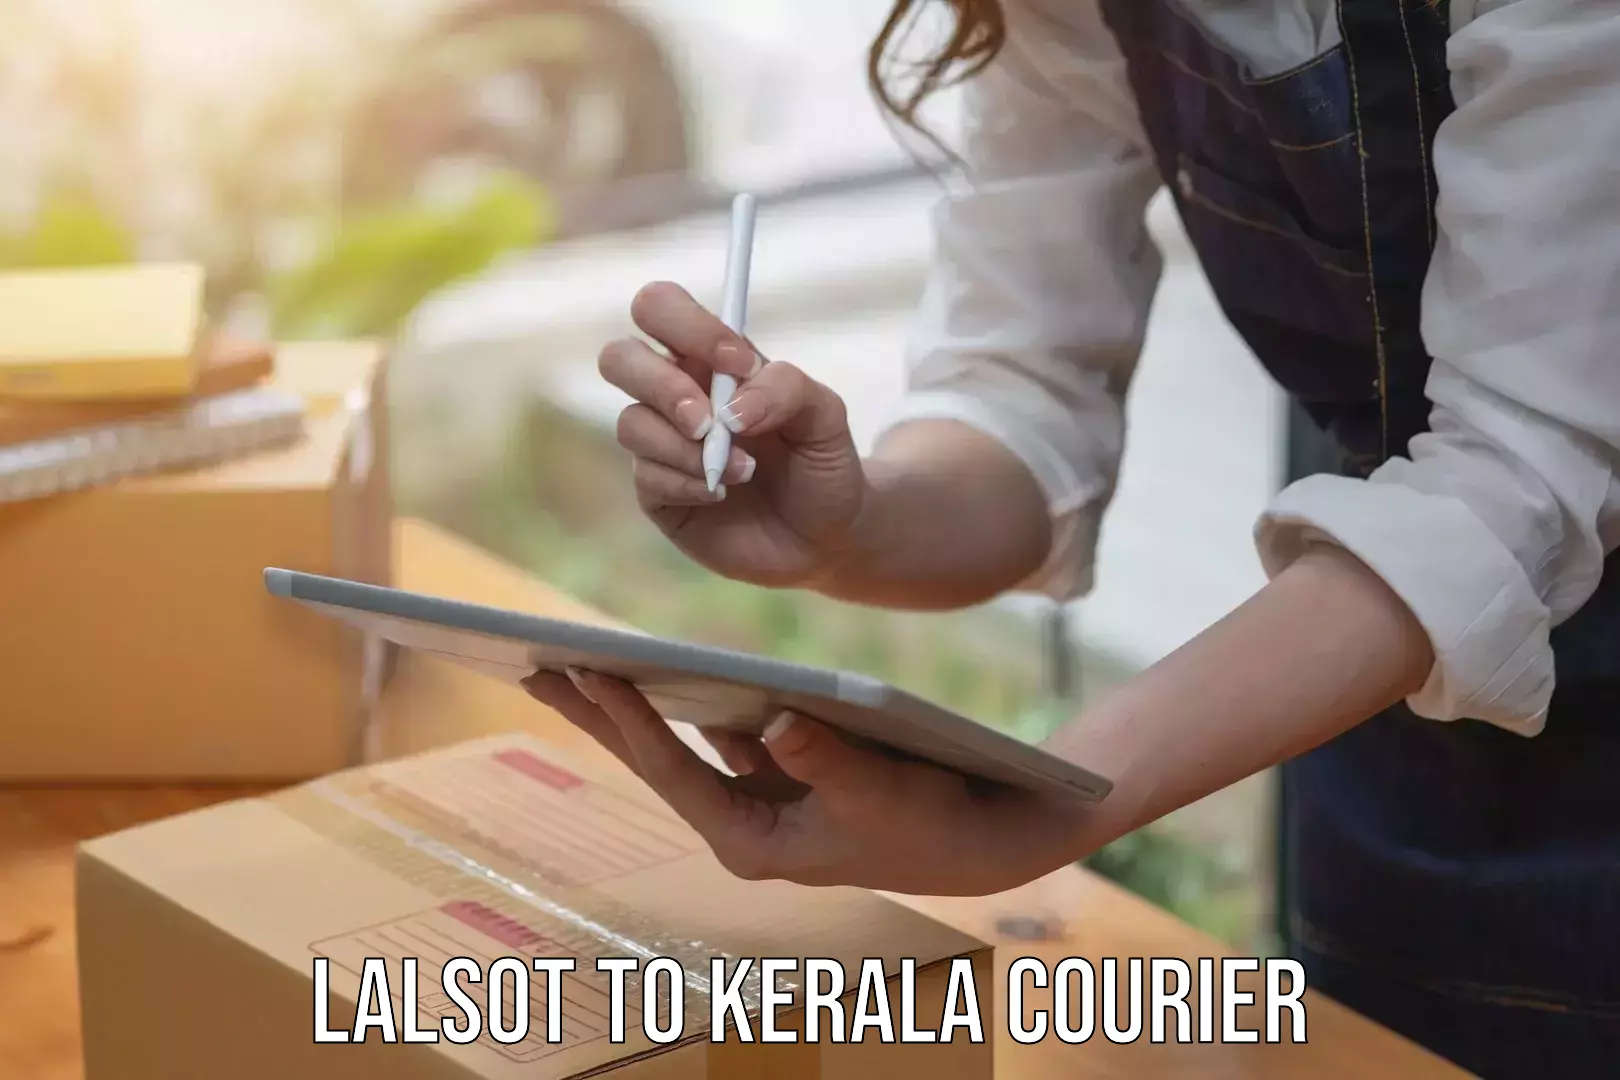 State-of-the-art courier technology Lalsot to Vaikom